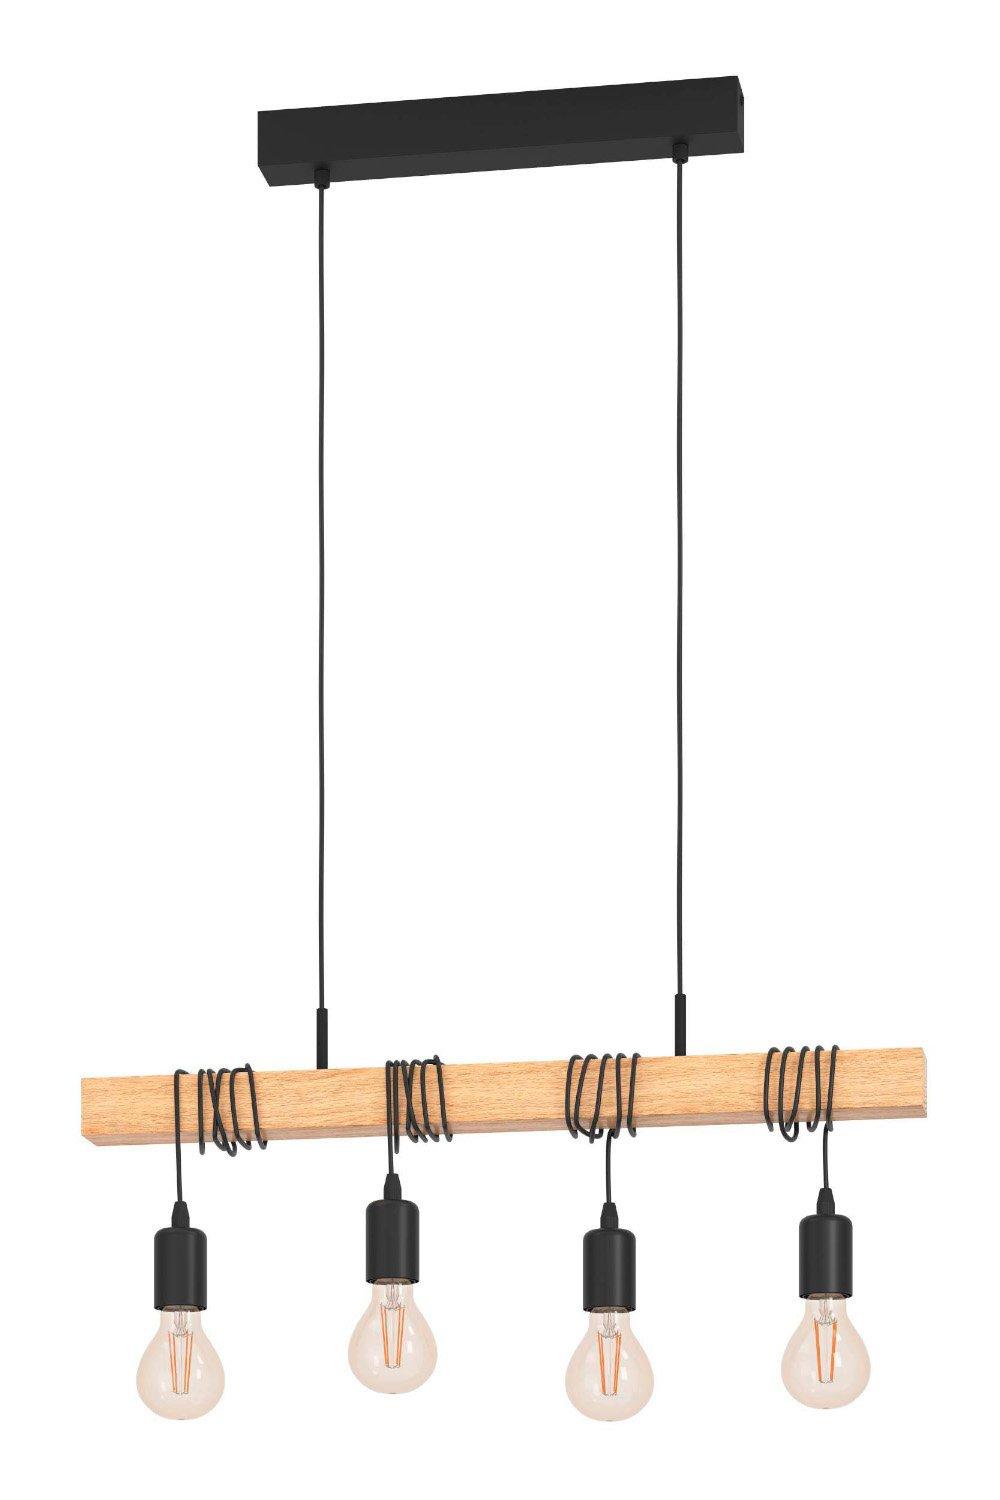 Townshend Natural Wood And Metal 4 Light Ceiling Pendant